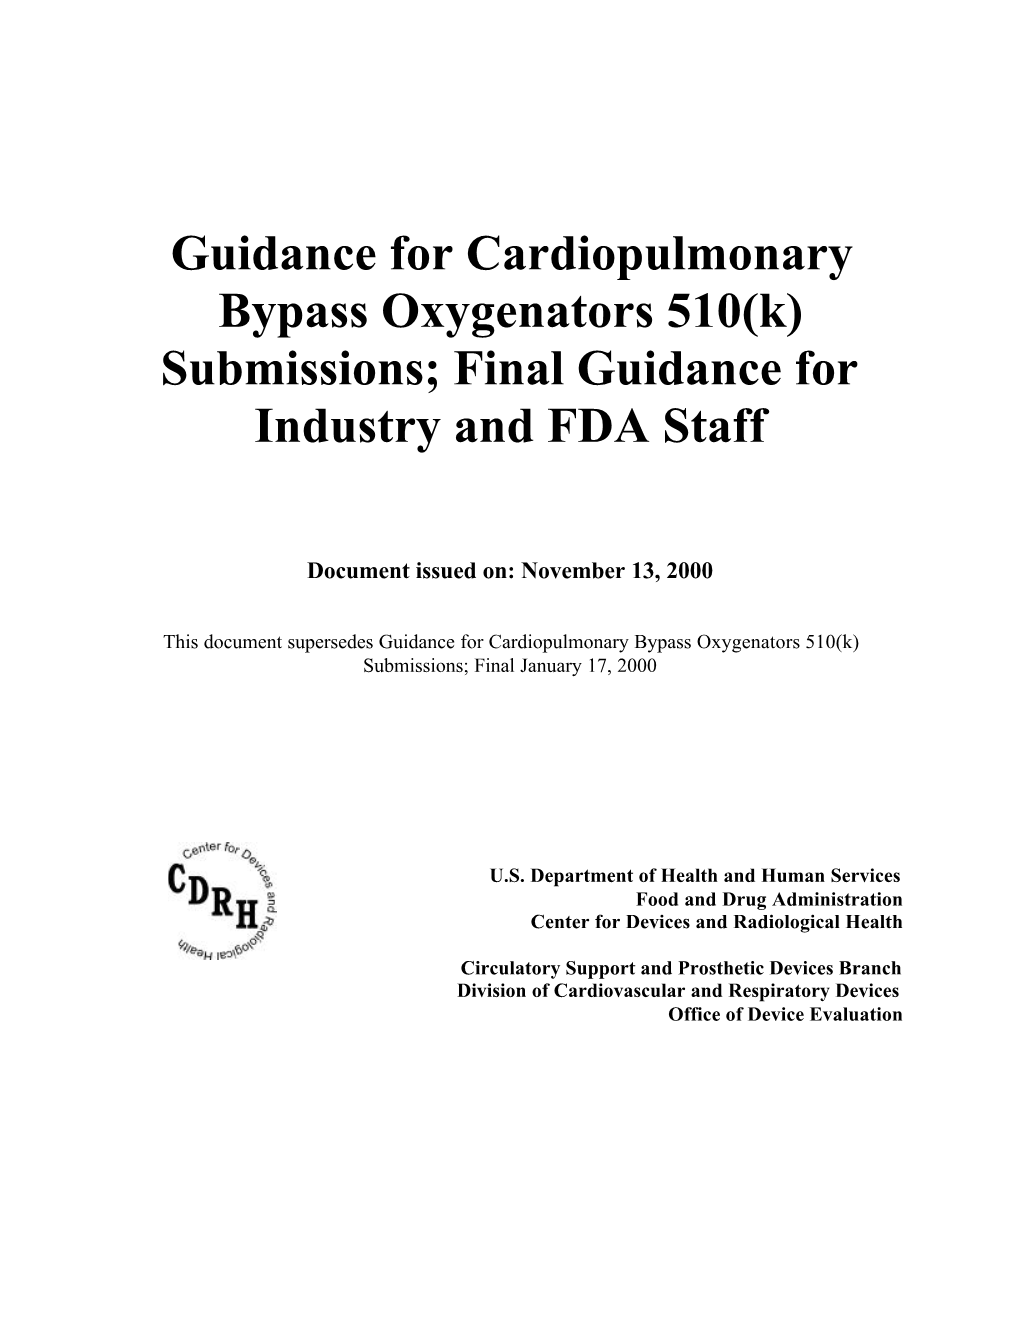 Guidance for Cardiopulmonary Bypass Oxygenators 510(K) Submissions; Final Guidance for Industry and FDA Staff